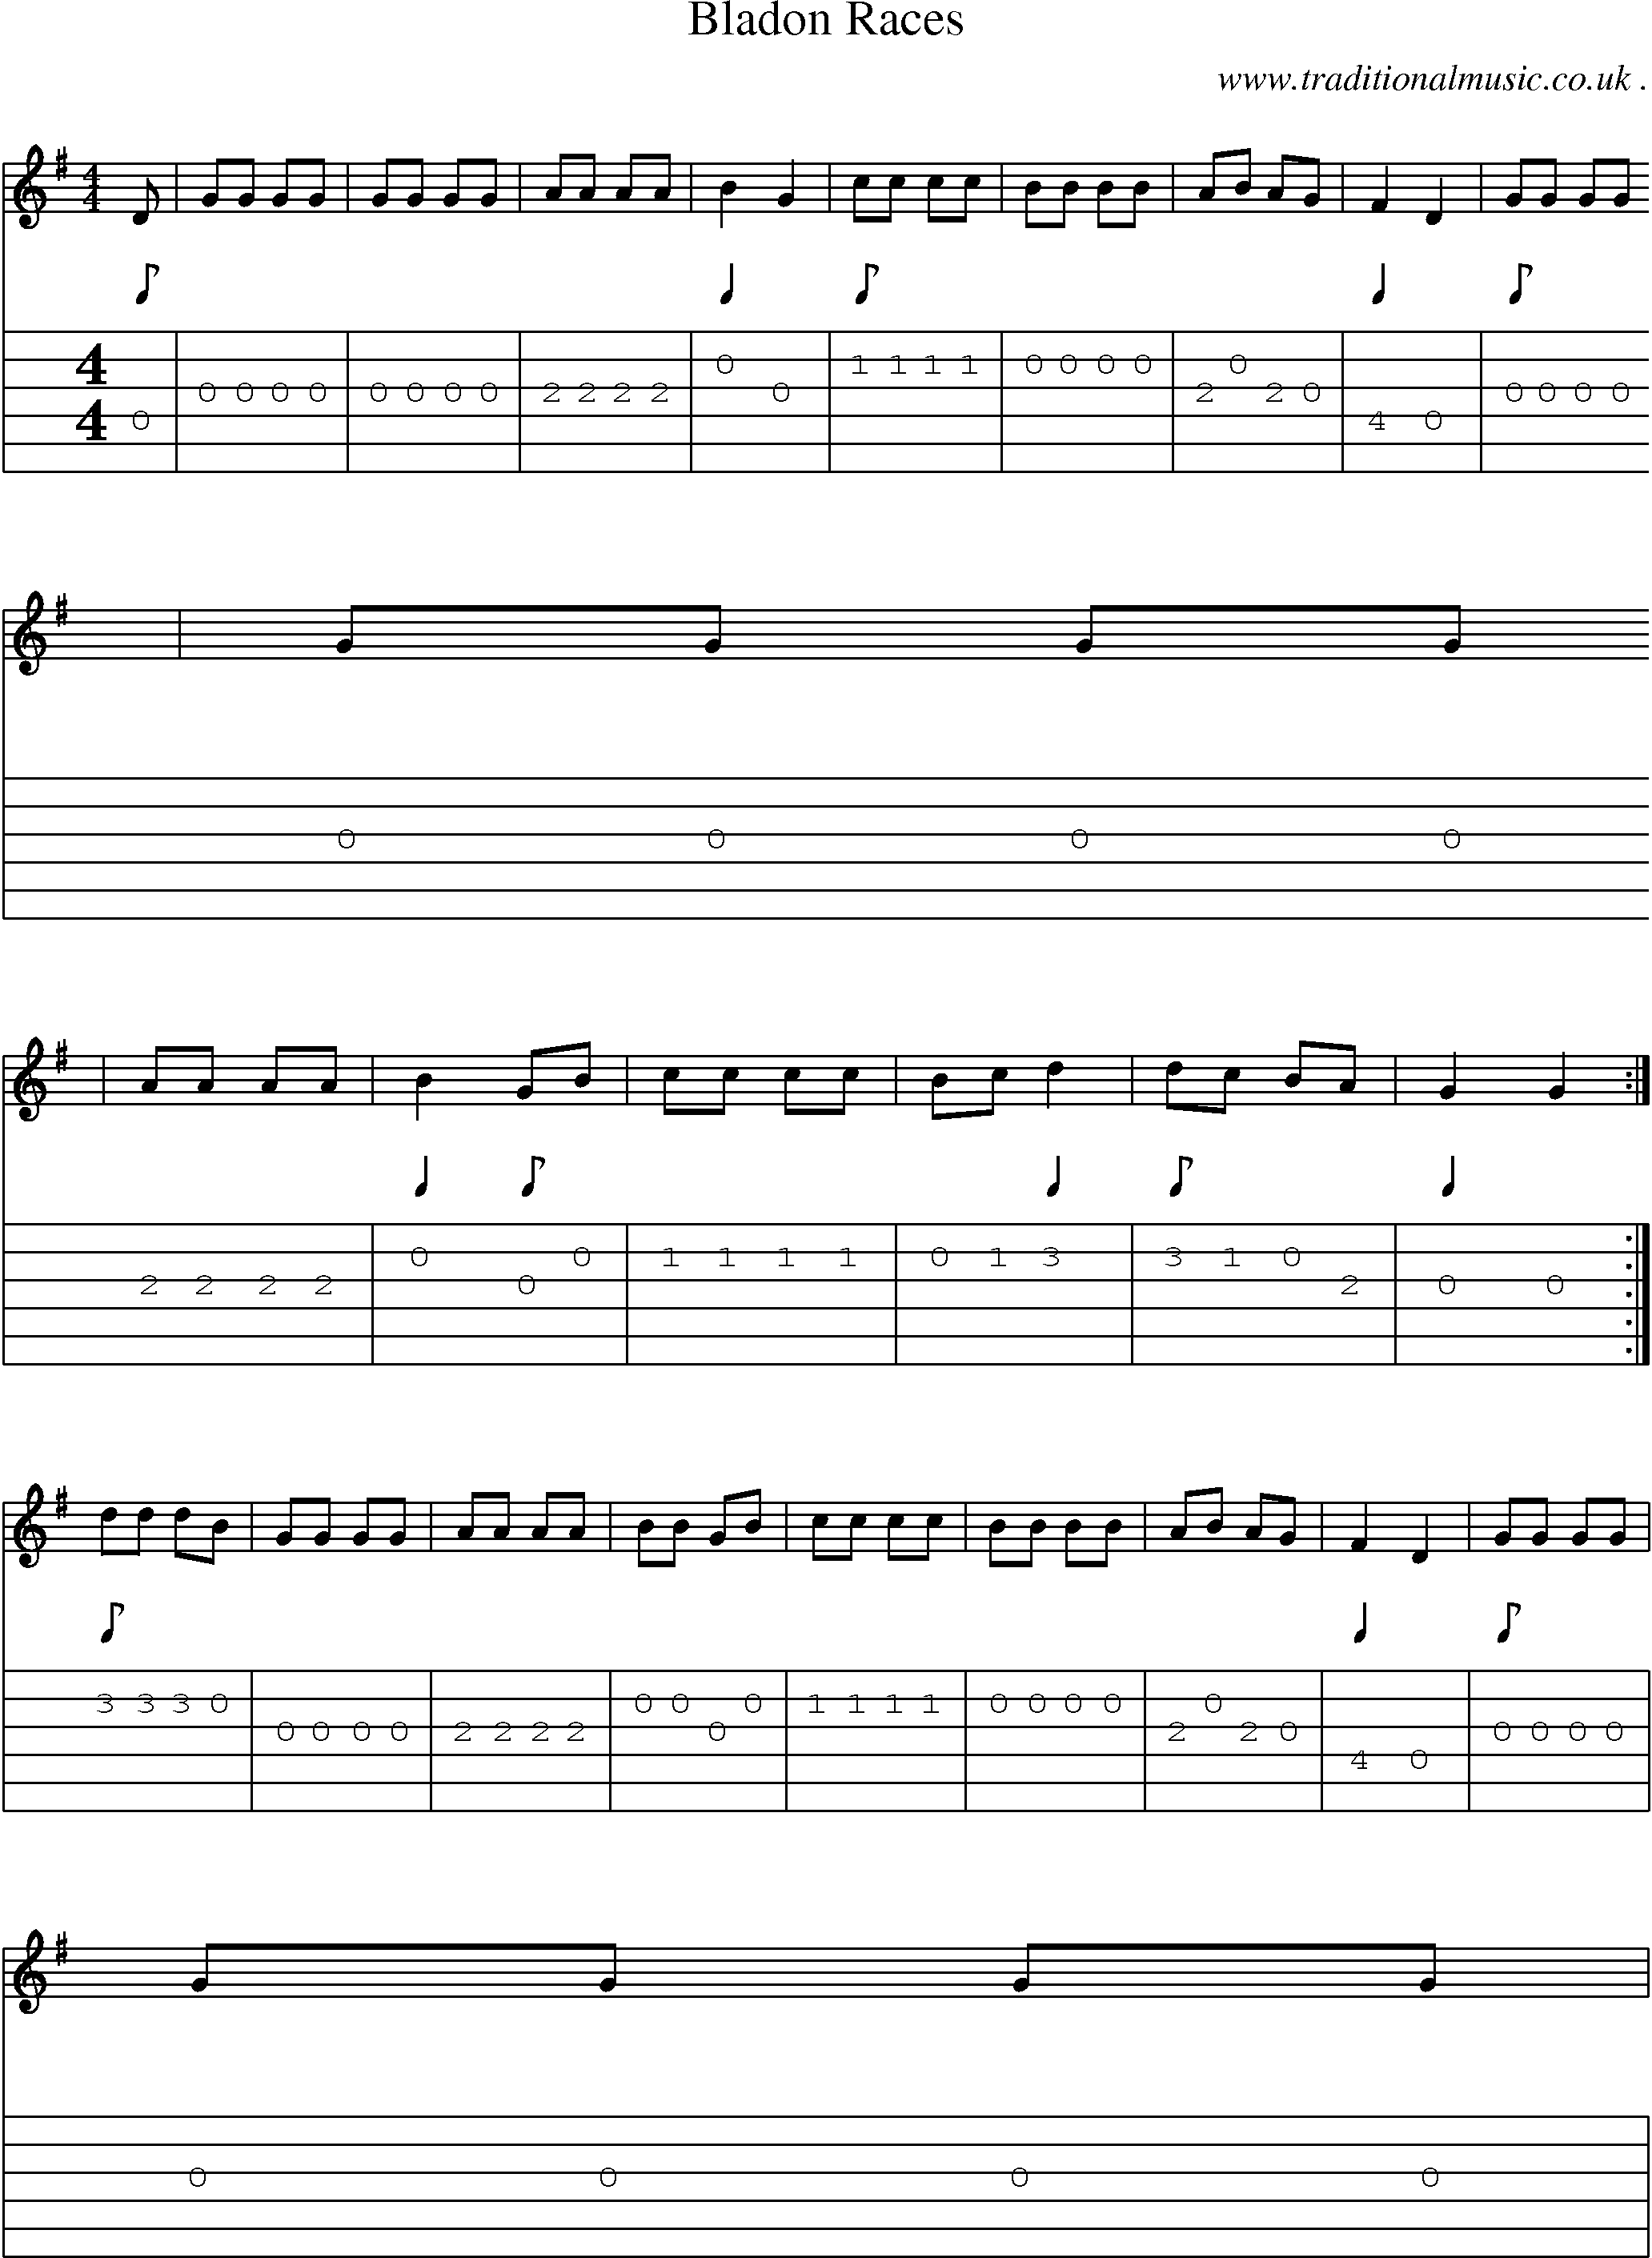 Sheet-Music and Guitar Tabs for Bladon Races